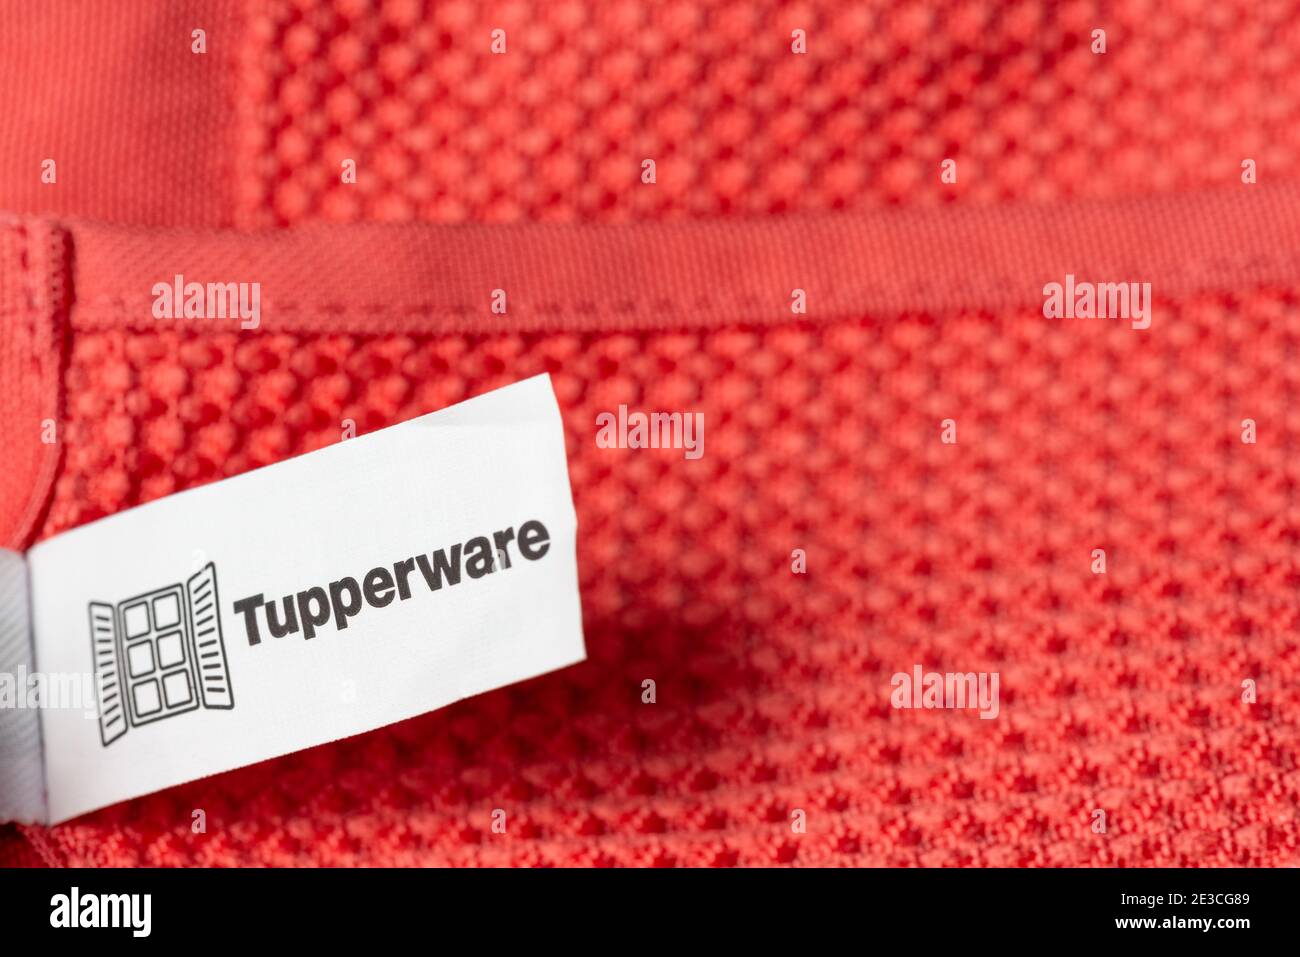 Tupperware label logo sign on microfiber cleaning cloth. Tupperware Brands home products. Stock Photo